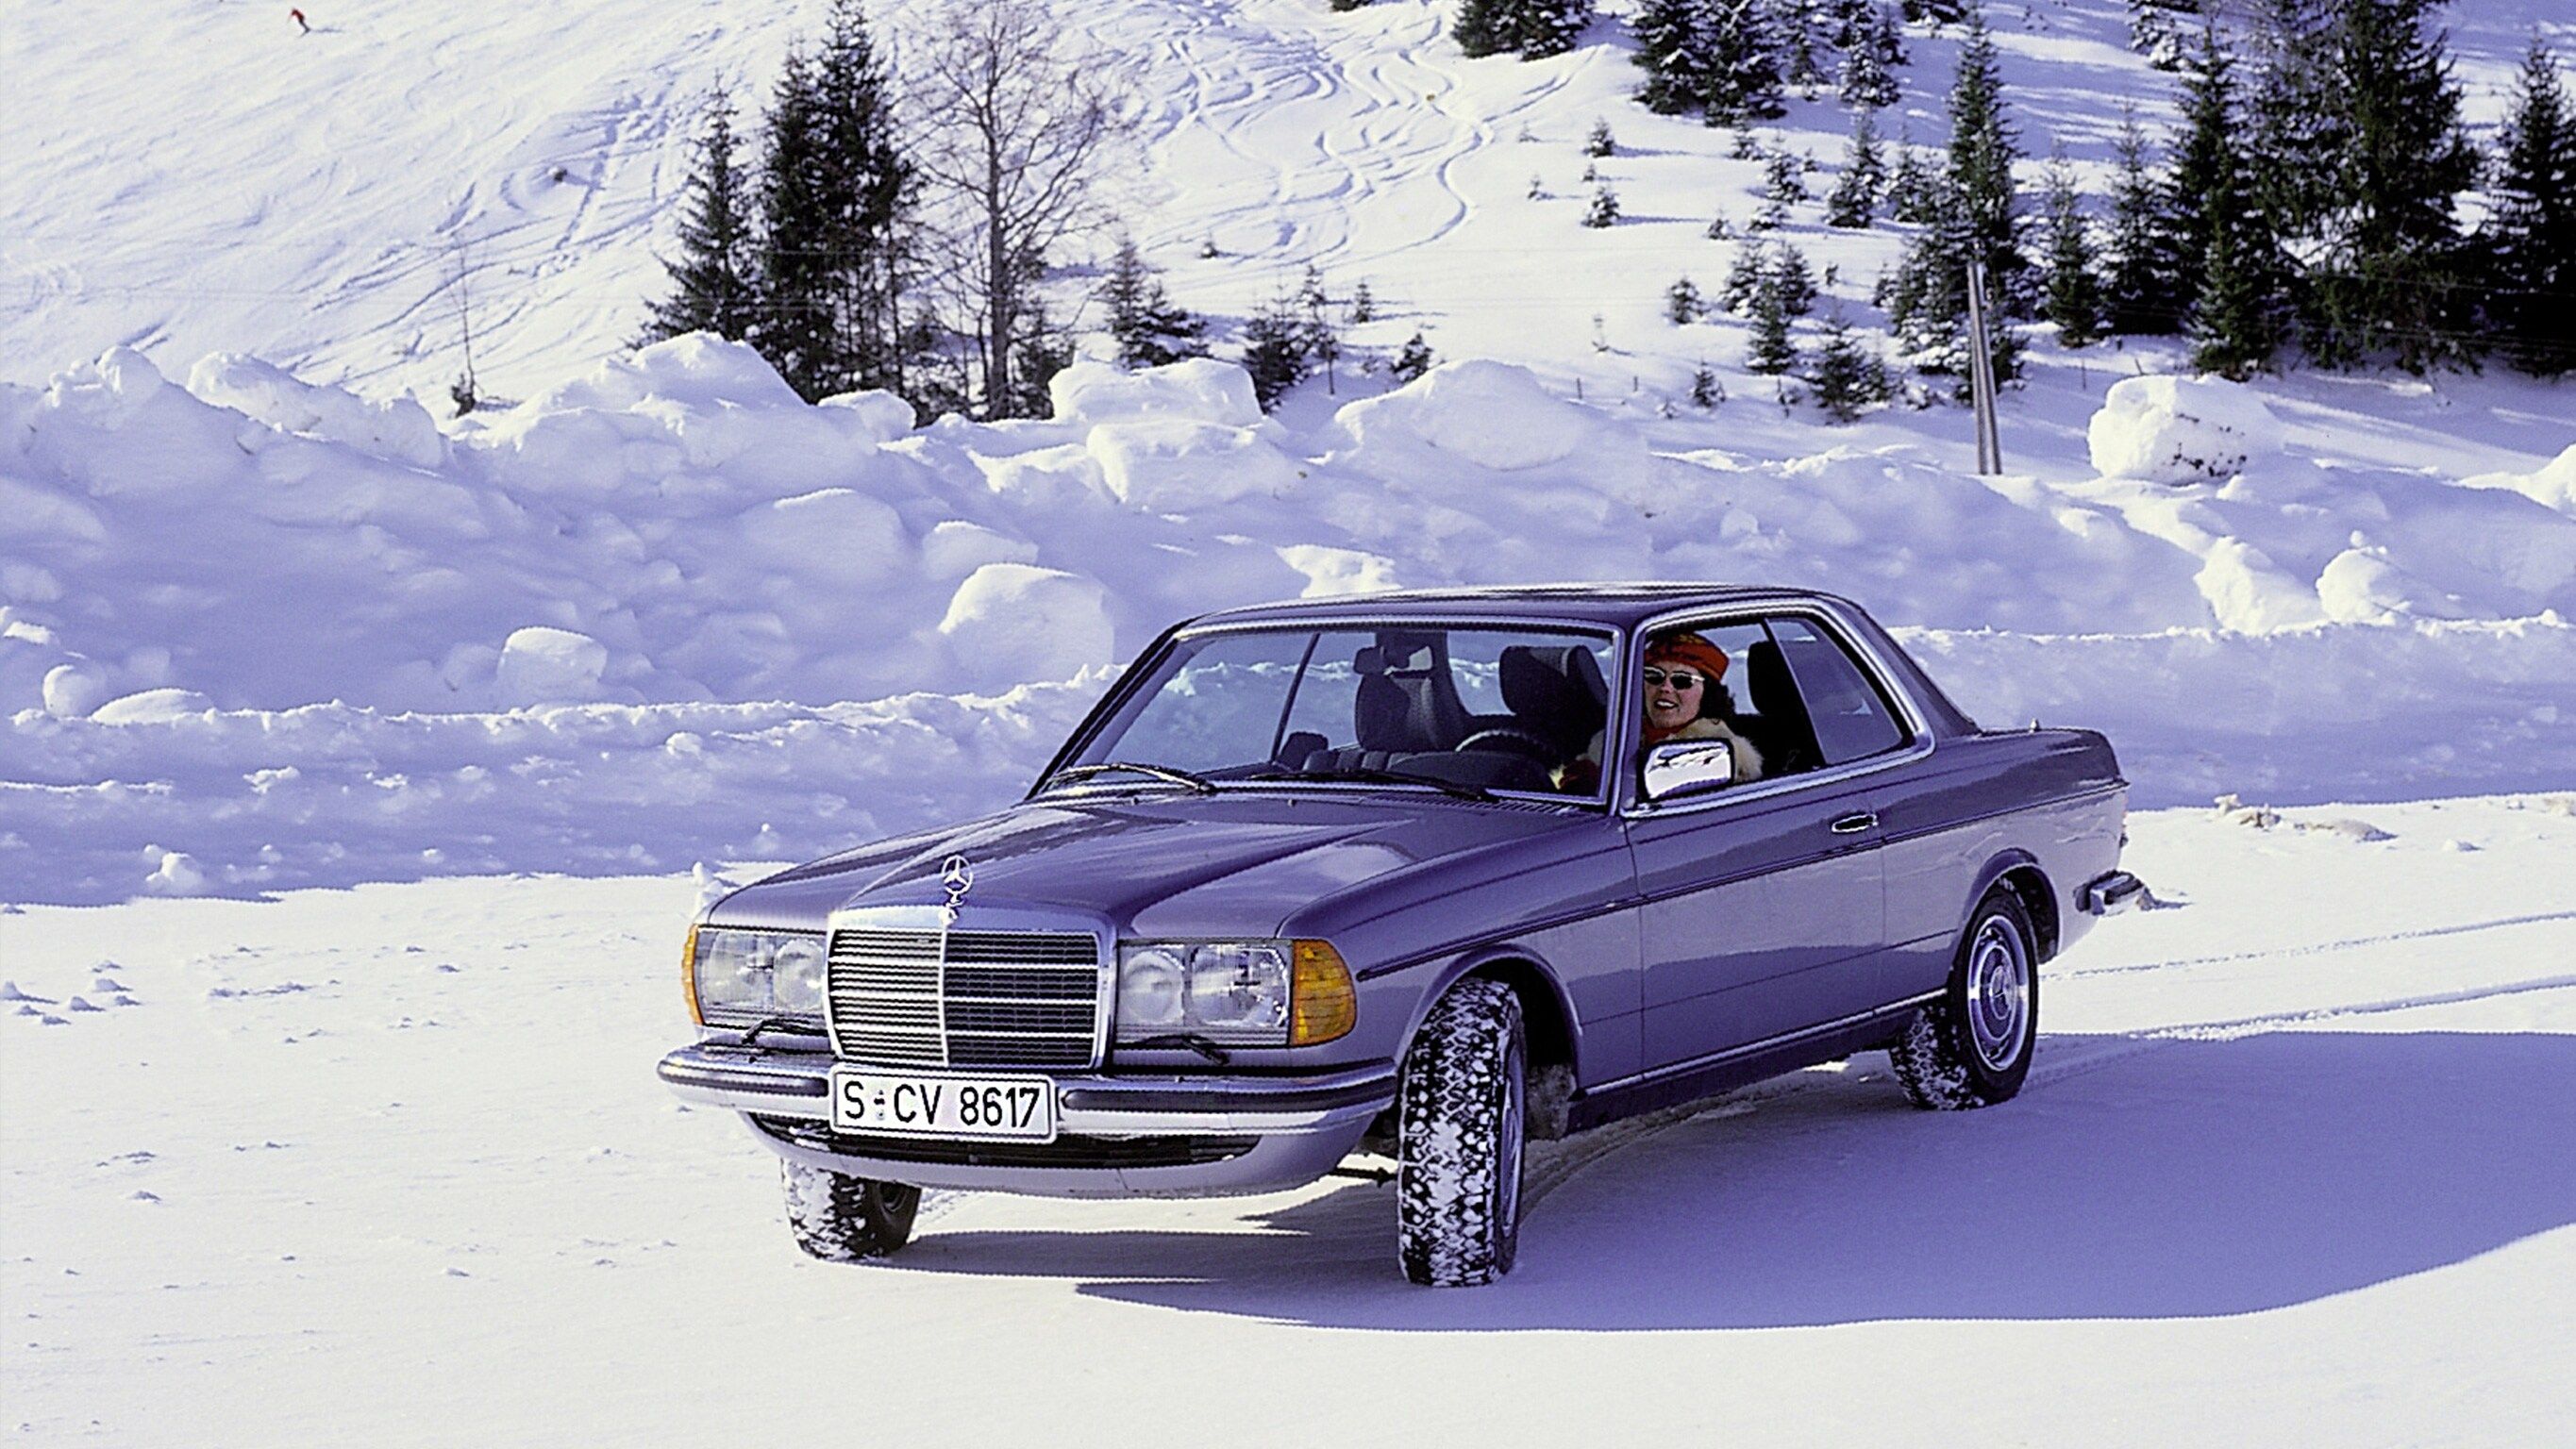 Mercedes W123 Coupe